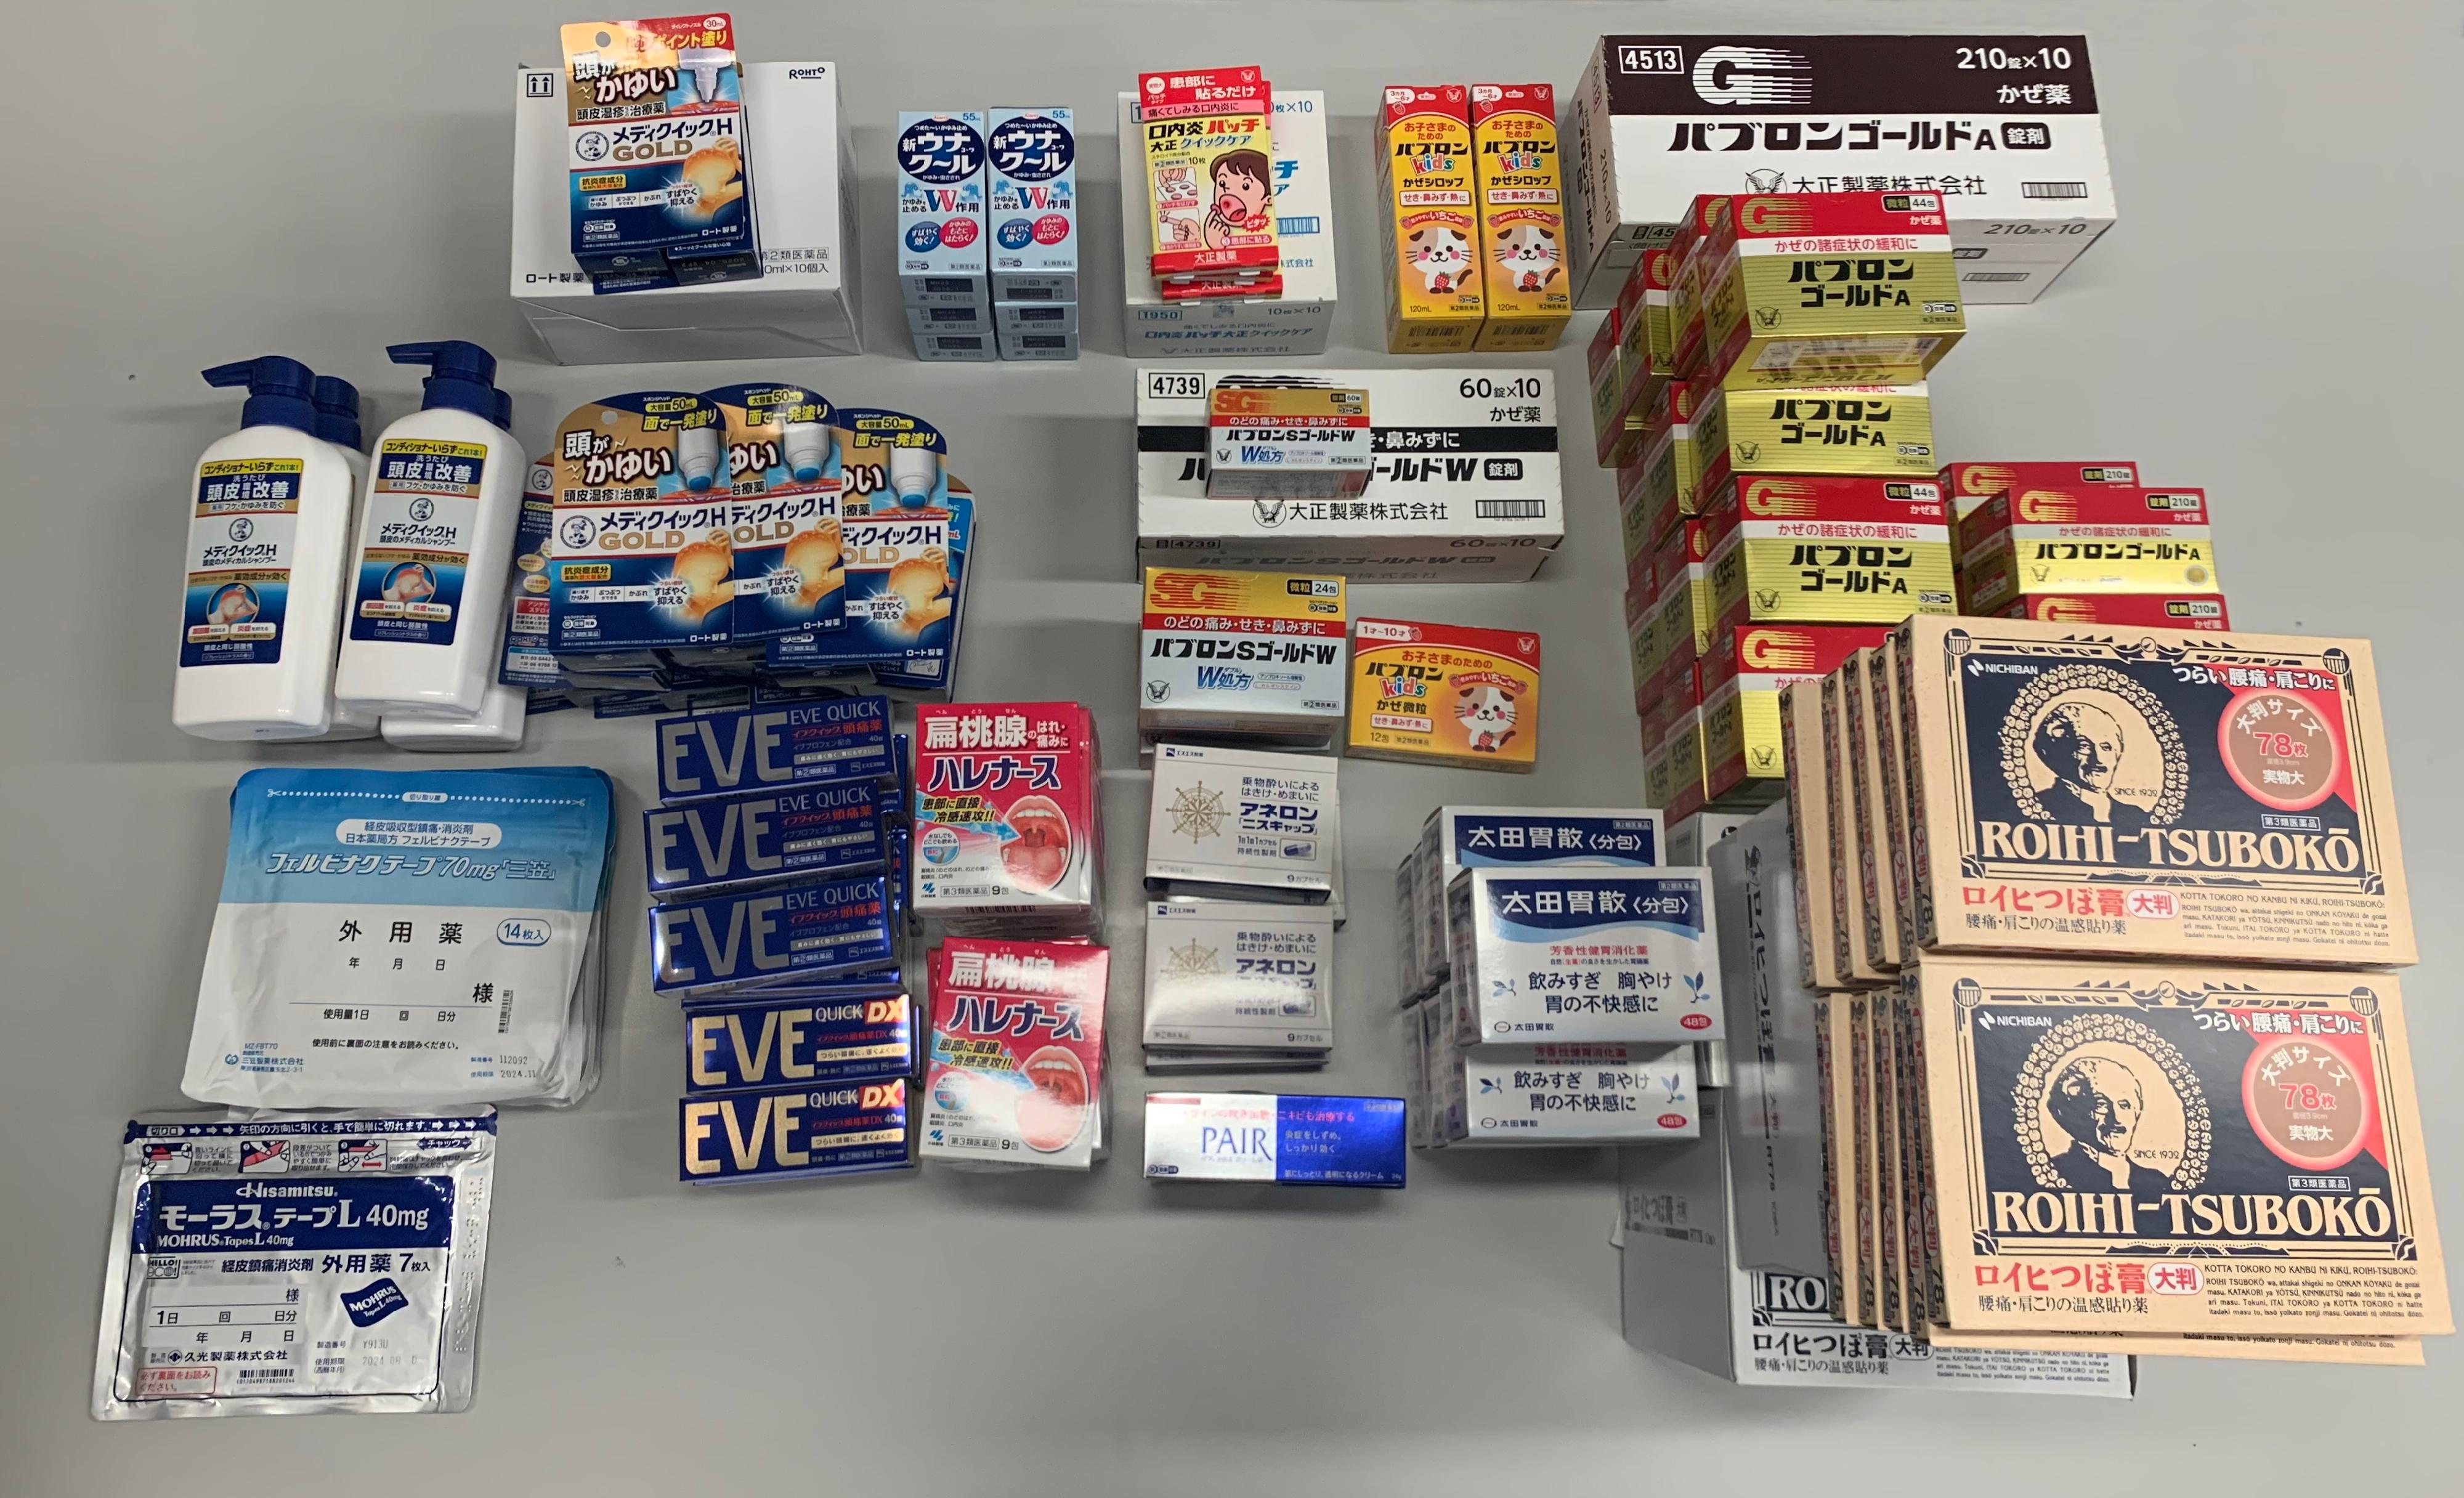 The Department of Health conducted an operation yesterday evening (October 17) against a retail shop in Yau Ma Tei for suspected illegal sale and possession of unregistered pharmaceutical products and Part 1 poisons. Photo shows unregistered pharmaceutical products and Part 1 poisons, including pain killers and cough and cold medicines.